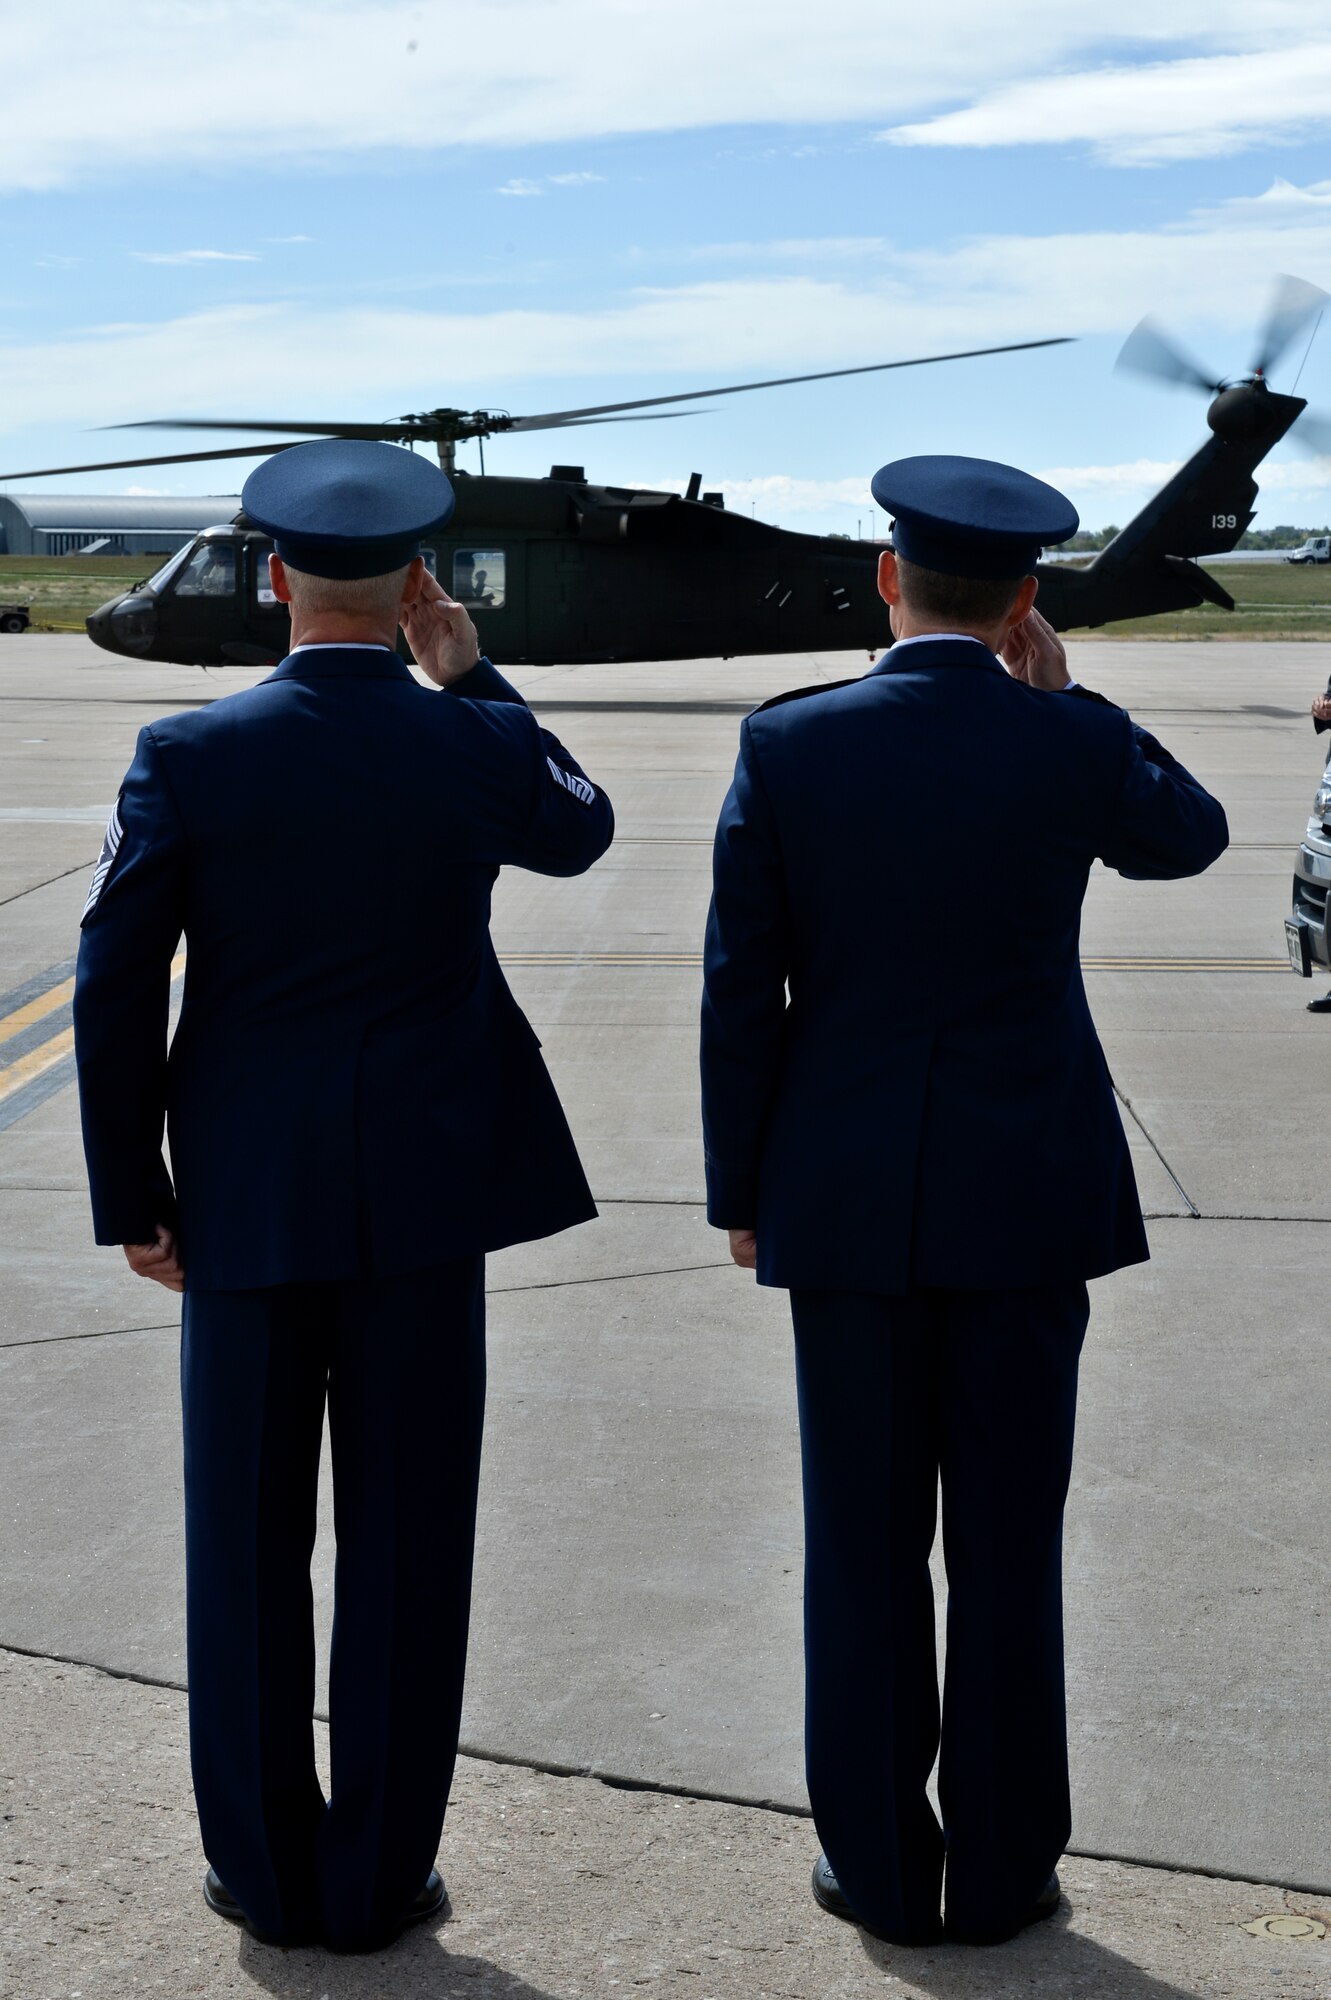 Chief Master Sgt. Craig S. Hall, 460th Space Wing command chief, left, and Col. Dan Wright, 460th SW commander, salute Vice President Joe Biden as he departs on a Colorado Army National UH-60 Black Hawk Sept. 23, 2013, at Buckley Air Force Base, Colo. Biden visited Colorado to view the damage and survey recovery efforts after the flooding that killed at least eight people and ravaged at least 14 counties.  (U.S. Air Force photo by Airman 1st Class Riley Johnson/Released)